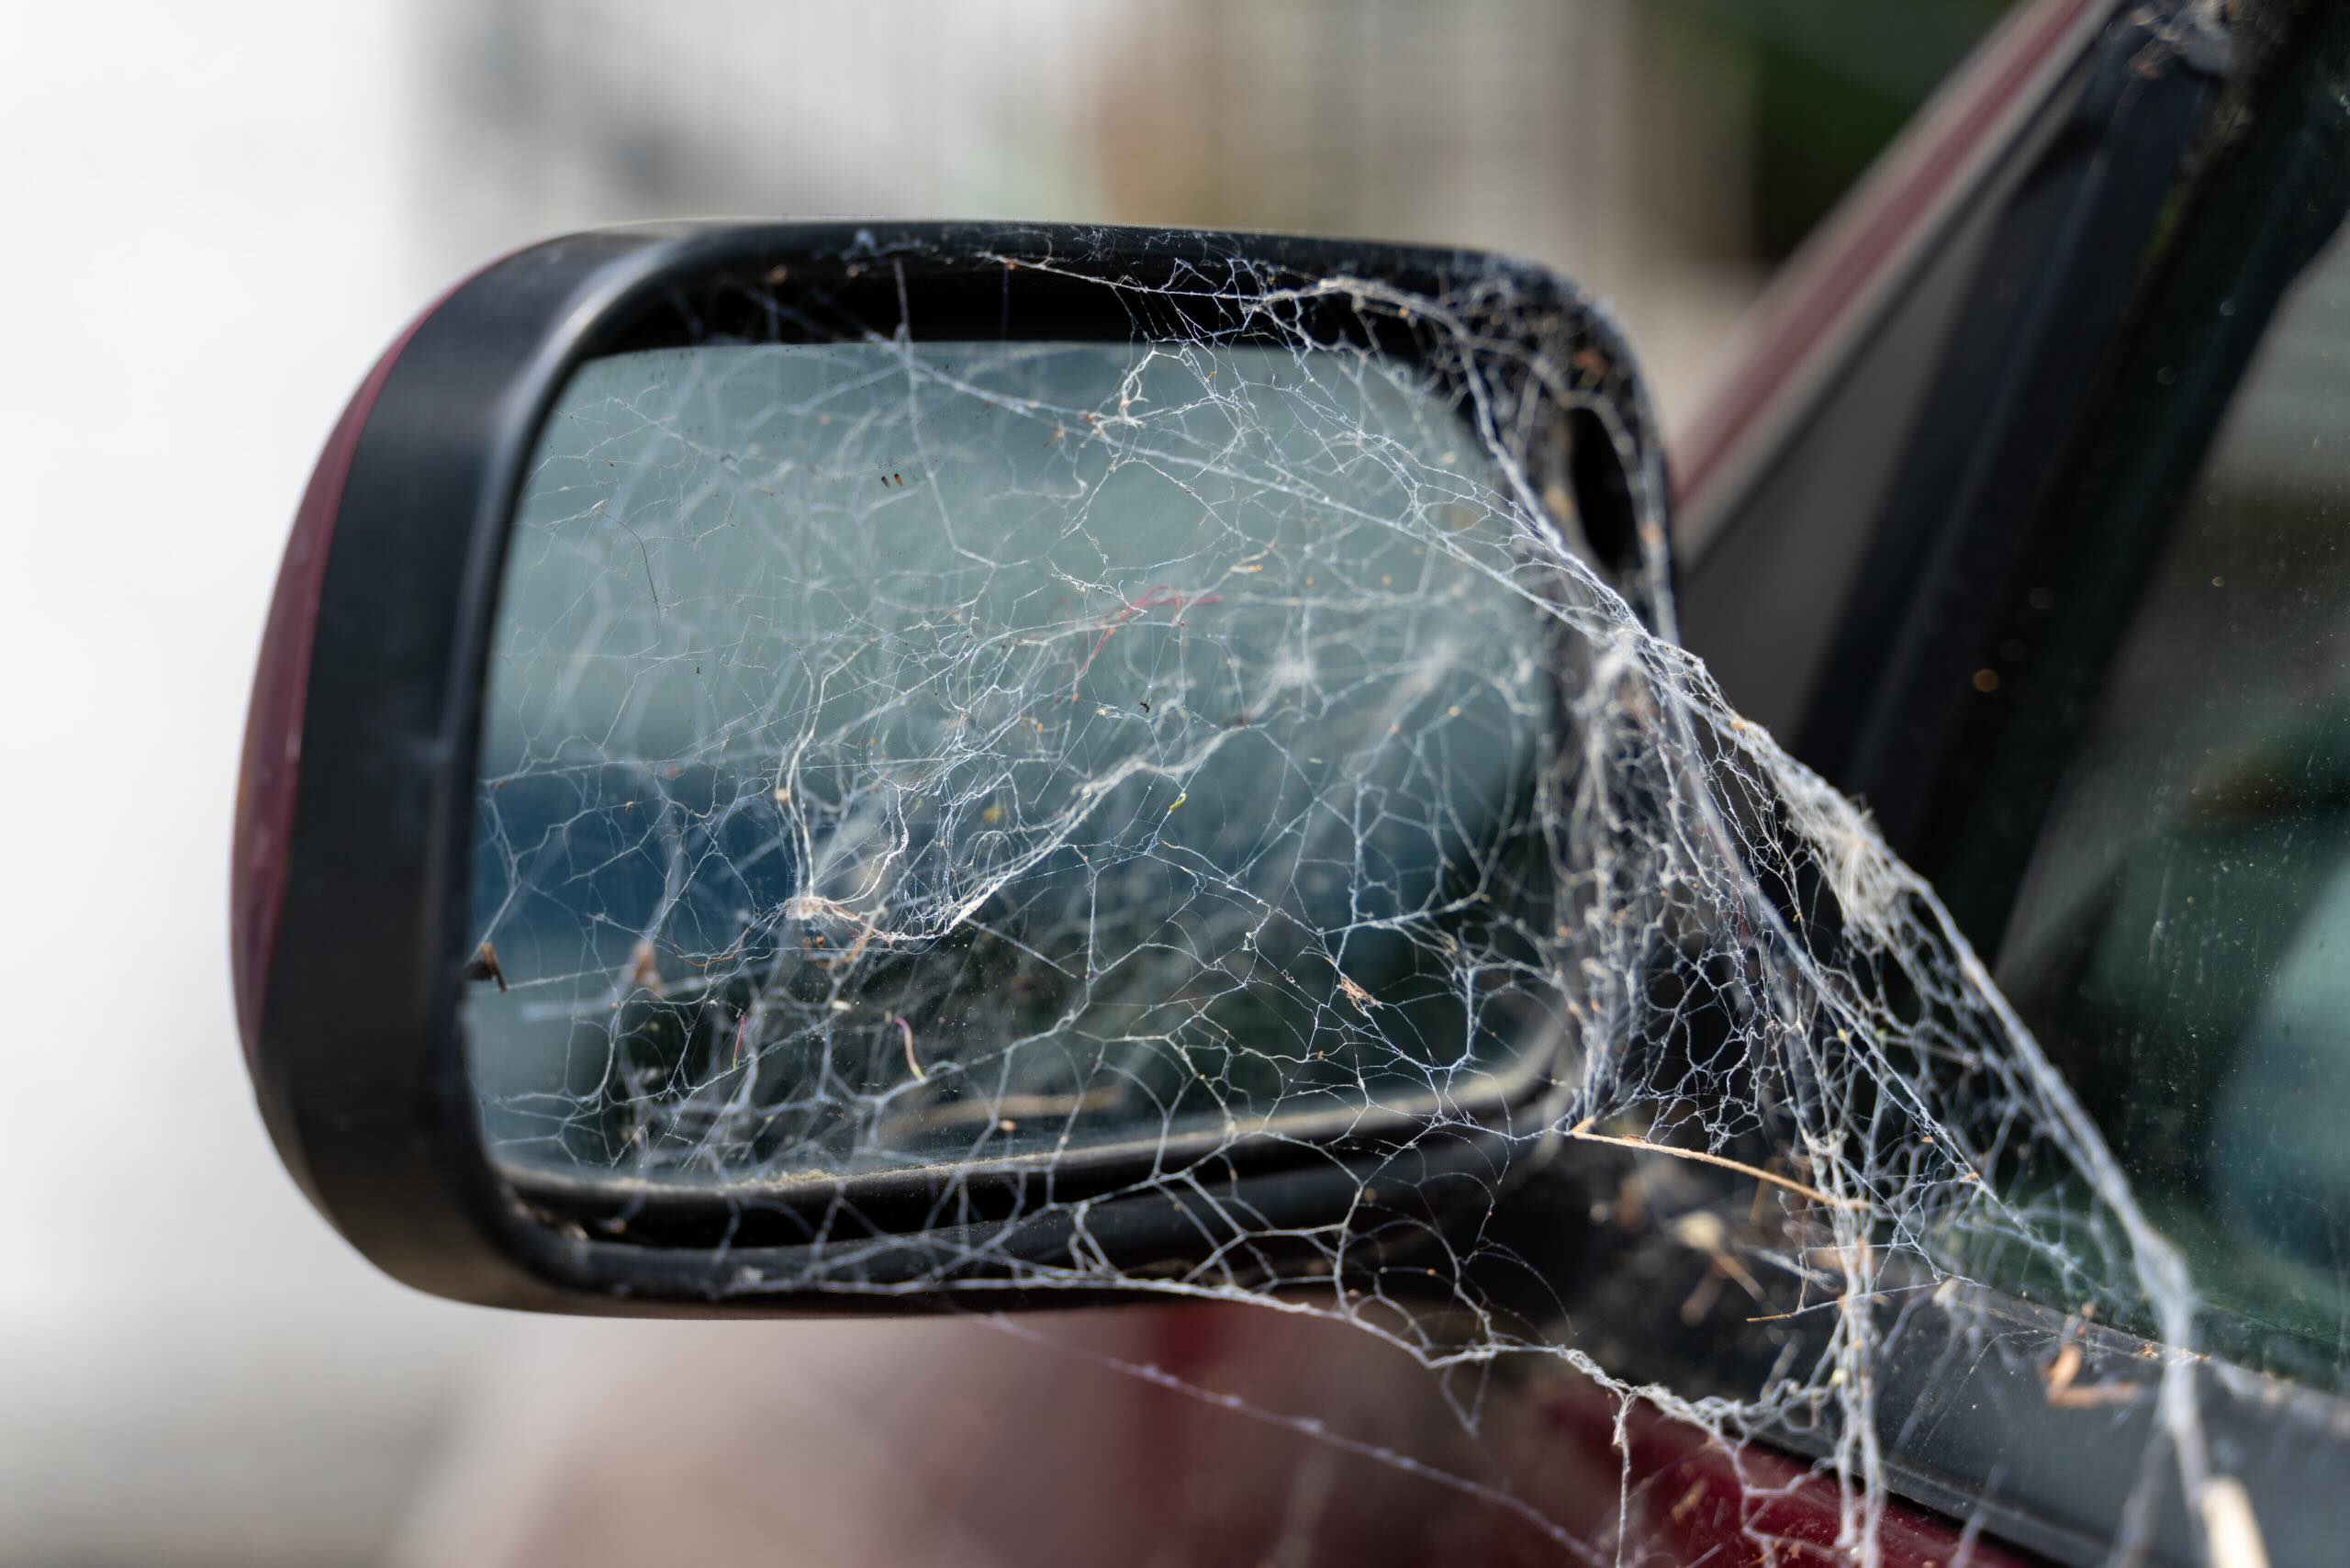 How To Keep Spiders Out Of Car Mirrors